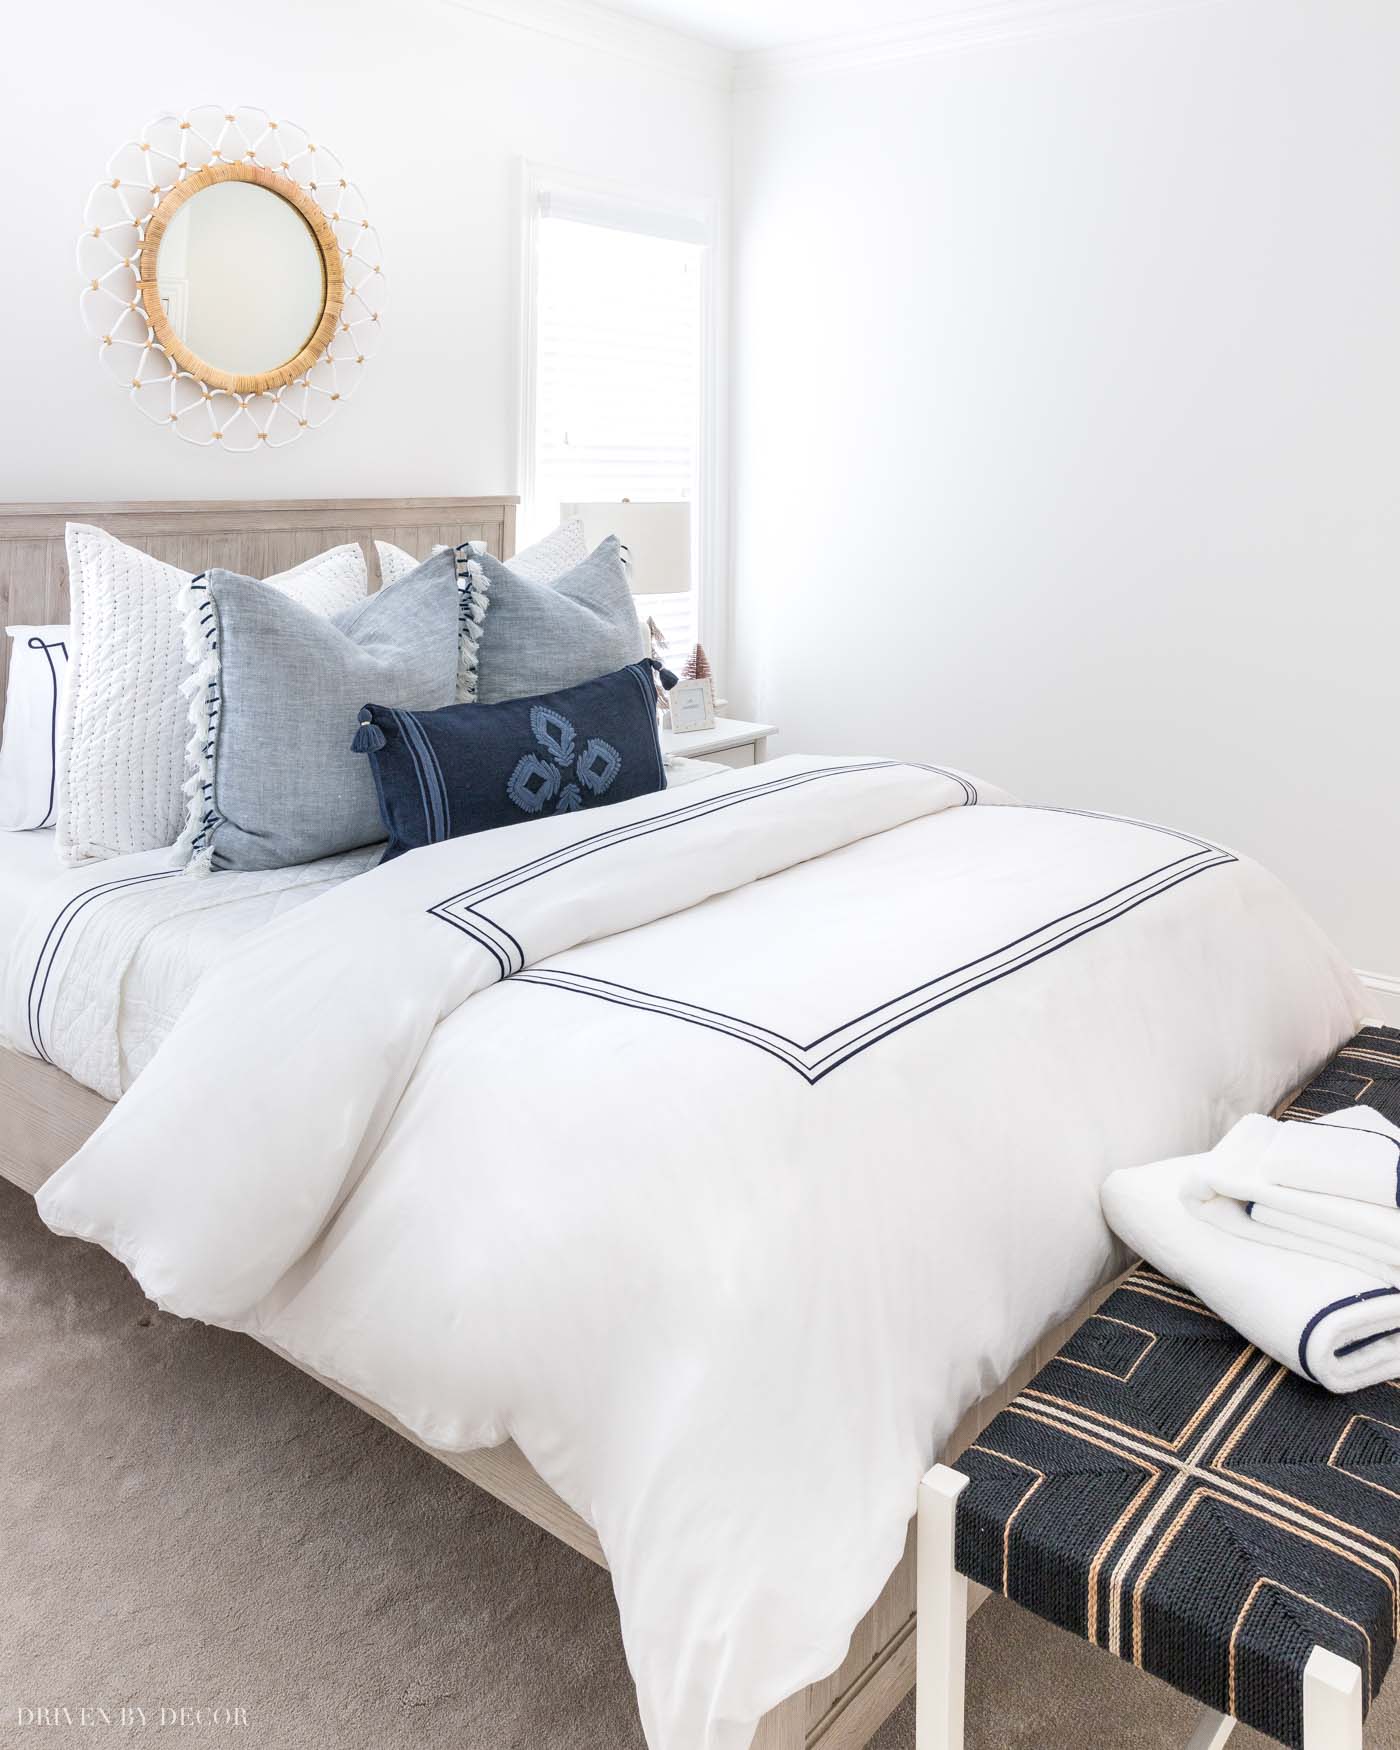 8 Simple Steps To Making The Perfect Bed Driven By Decor